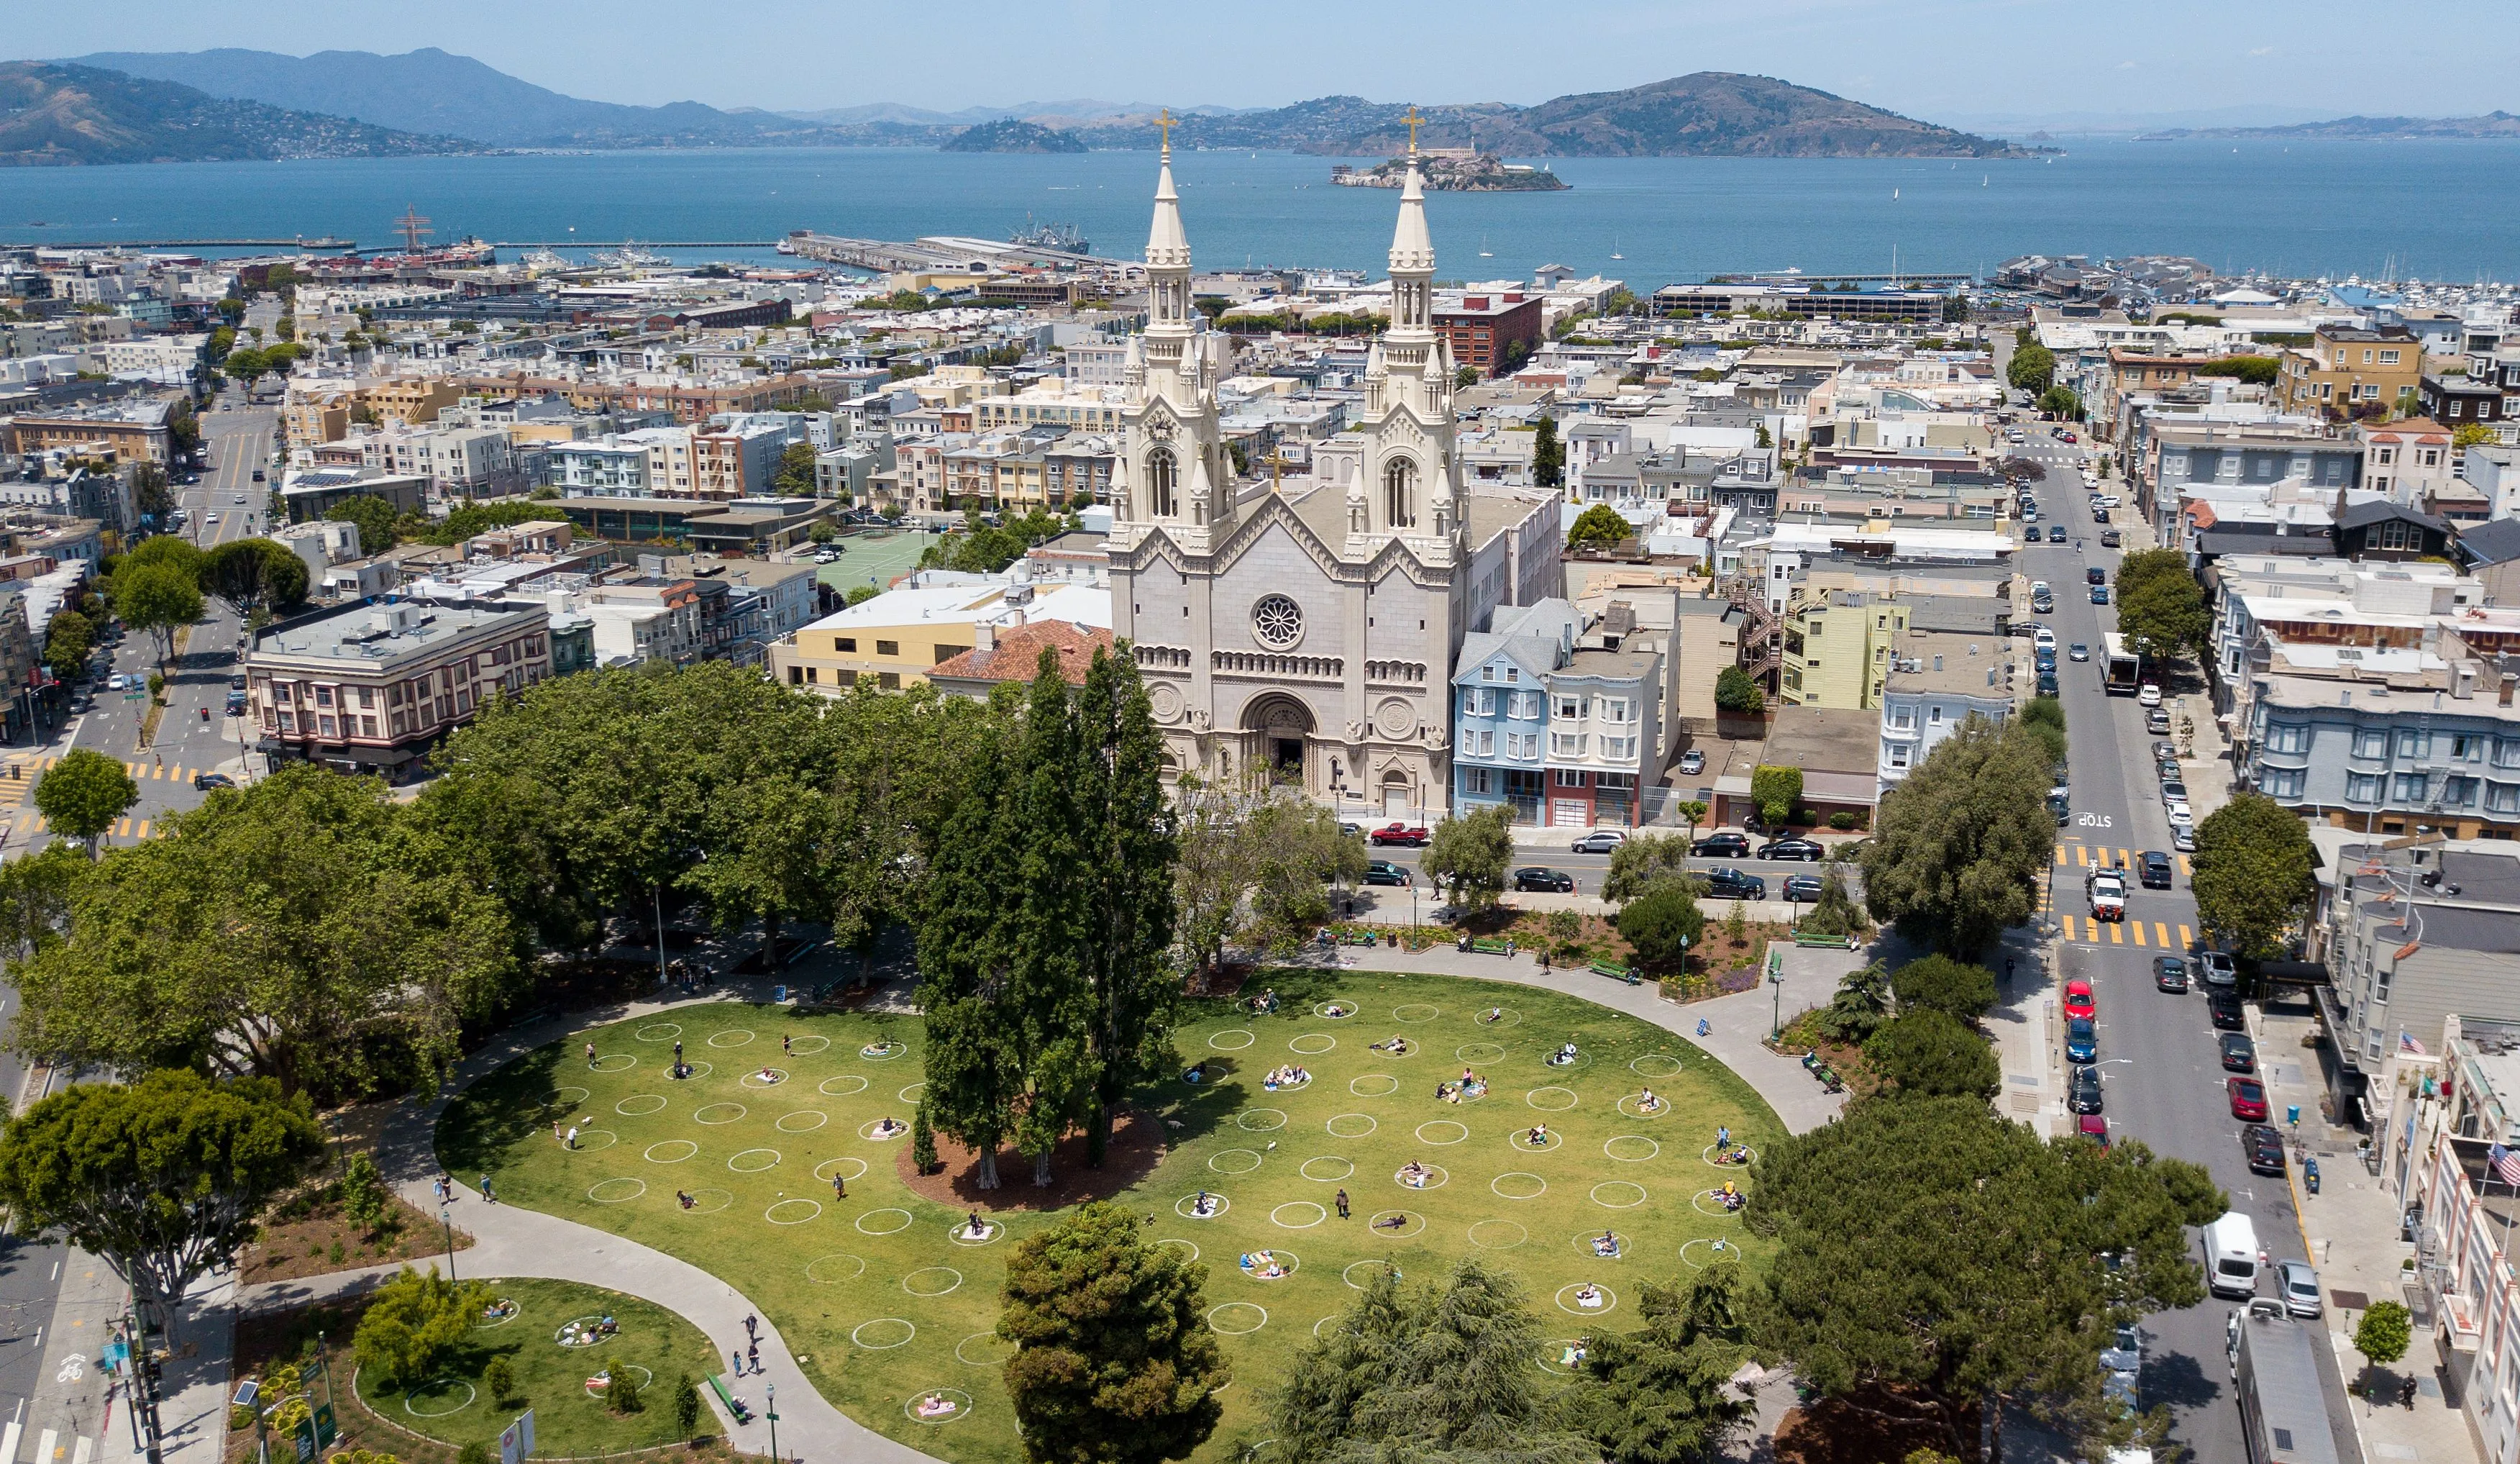 An aerial view of Washington Square in San Francisco on May 22, 2020.?w=200&h=150